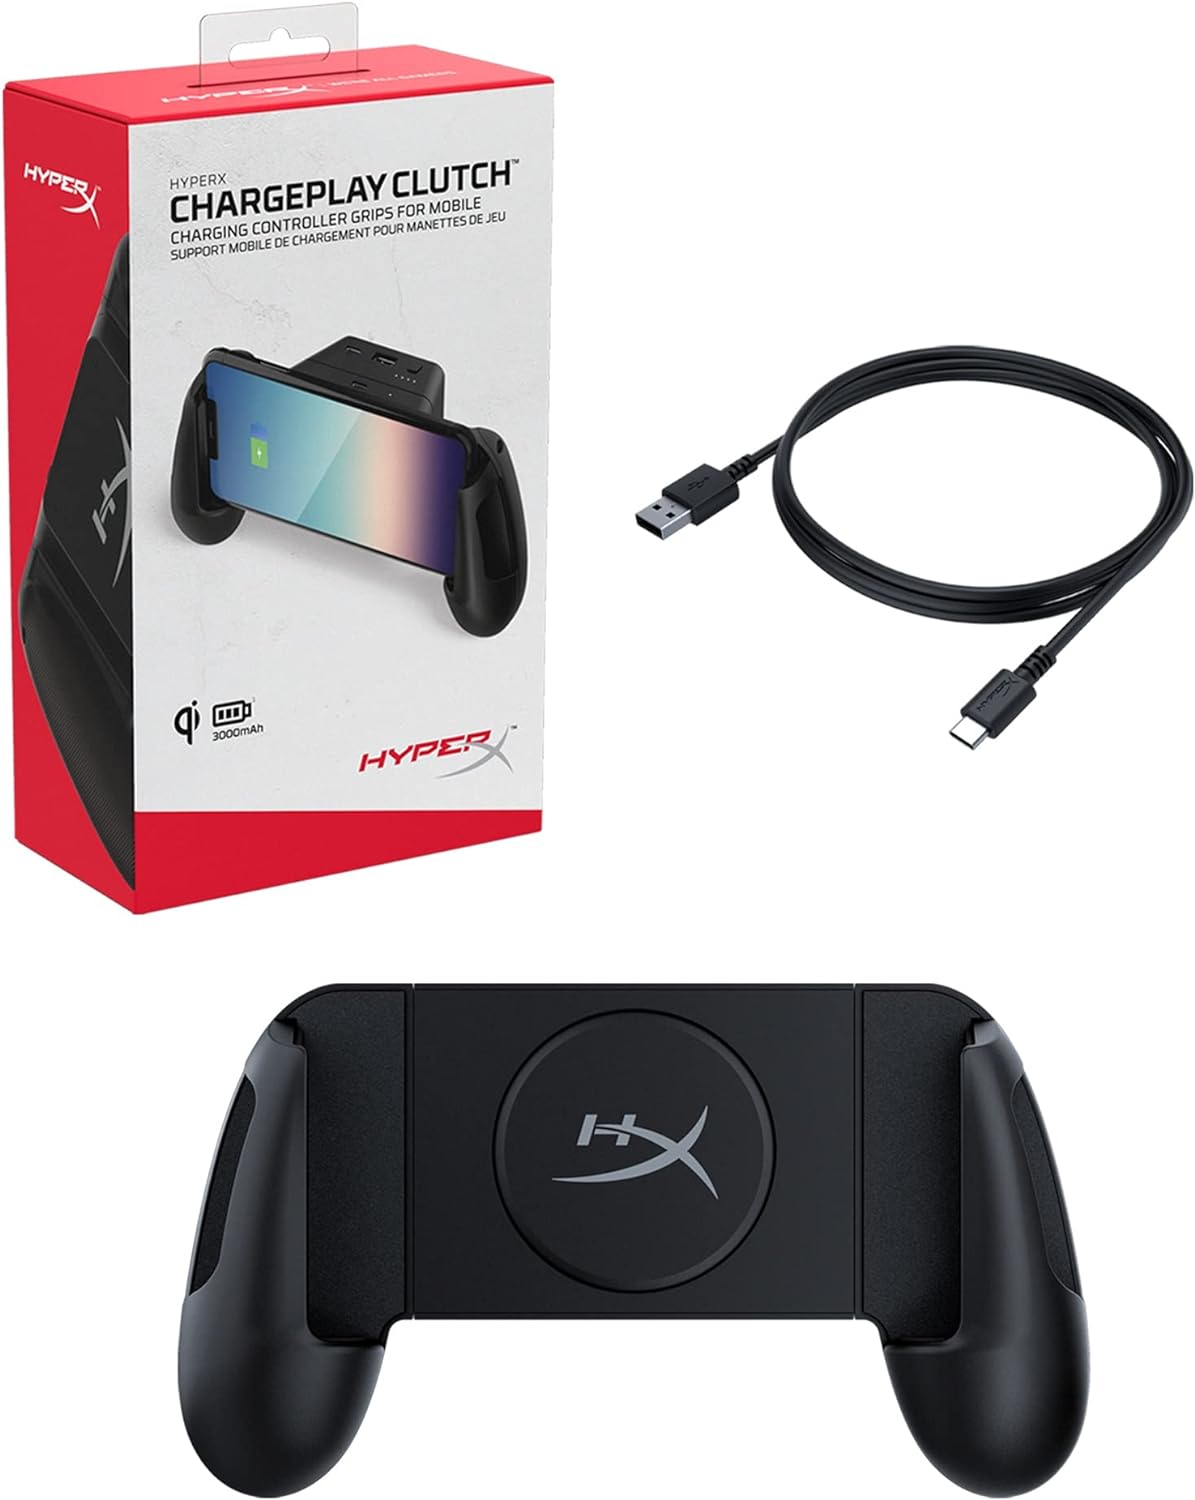 HyperX ChargePlay Clutch – Qi Certified Wireless Charging Controller Grips for Mobile Phones, Detachable Battery Pack, Compatible with Qi Enabled Android and iPhone Devices, USB Charging Option